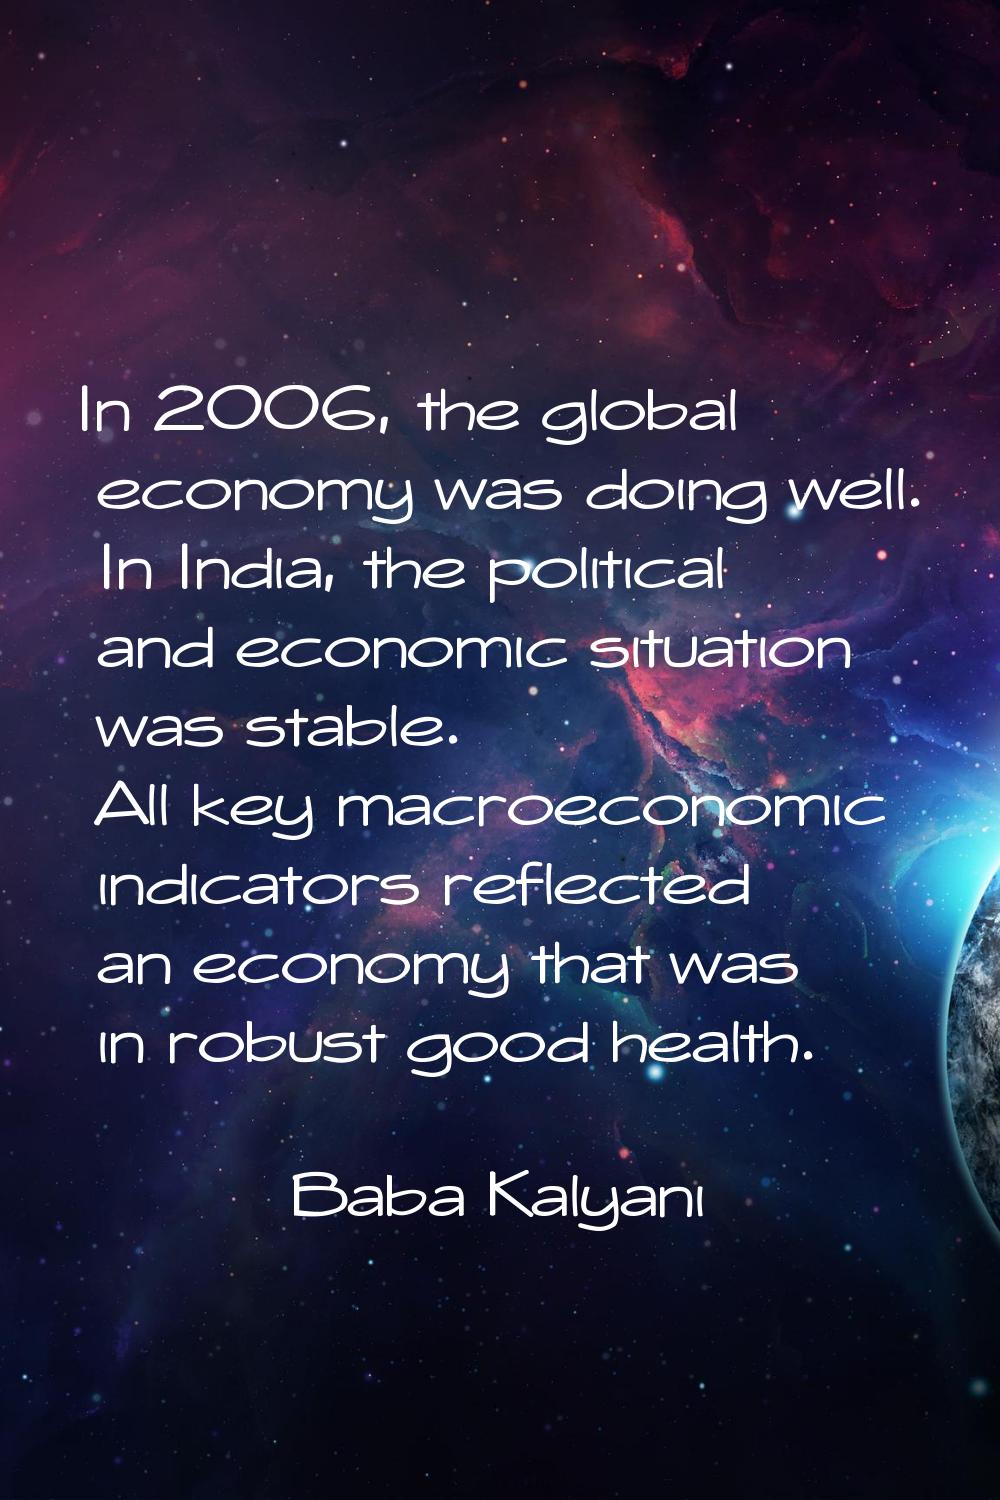 In 2006, the global economy was doing well. In India, the political and economic situation was stab